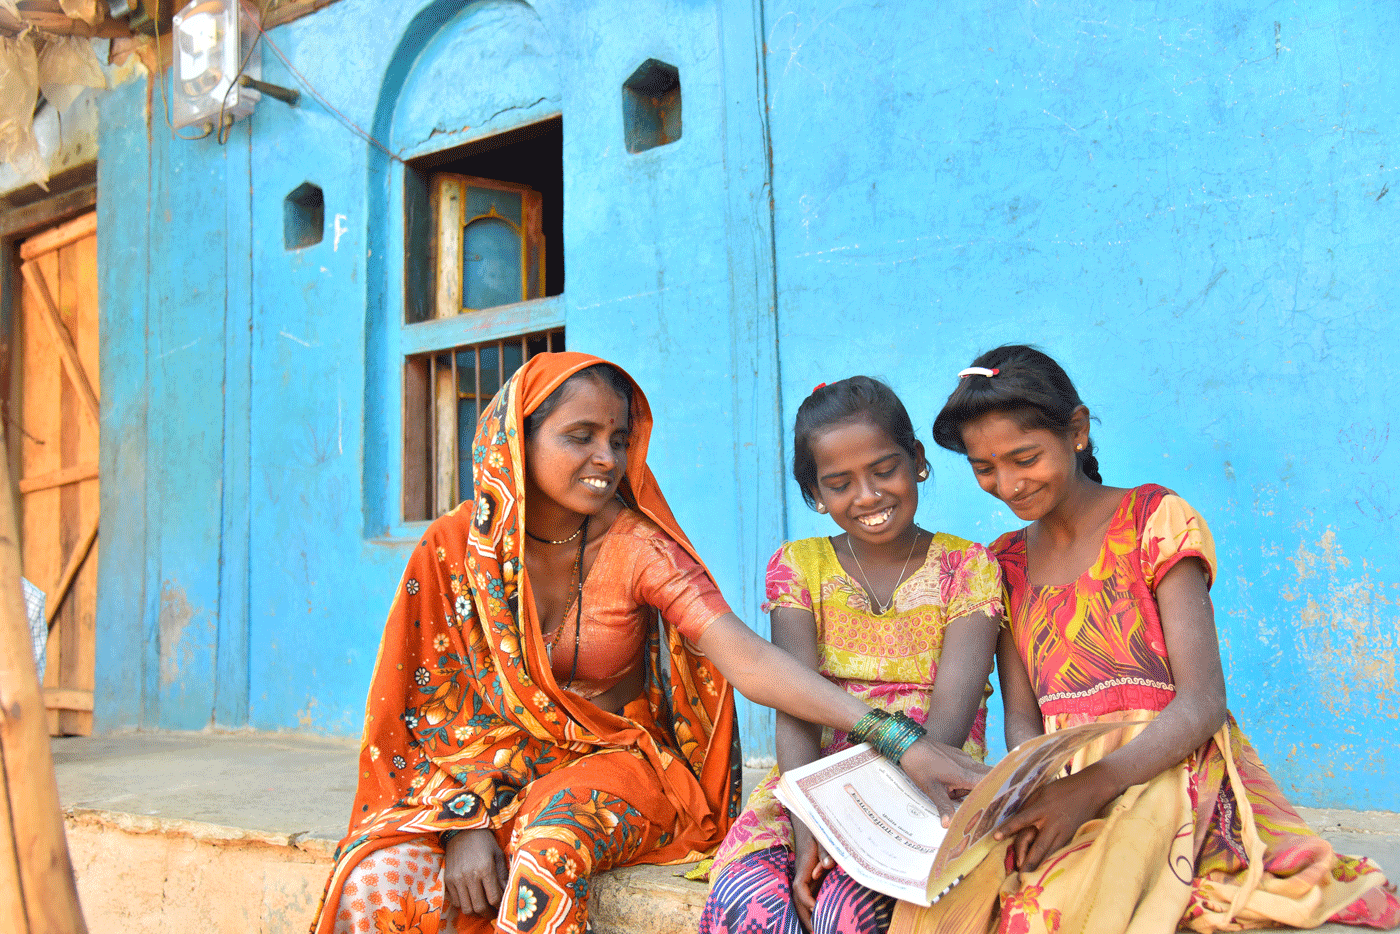 A woman and two girls looking at a book.